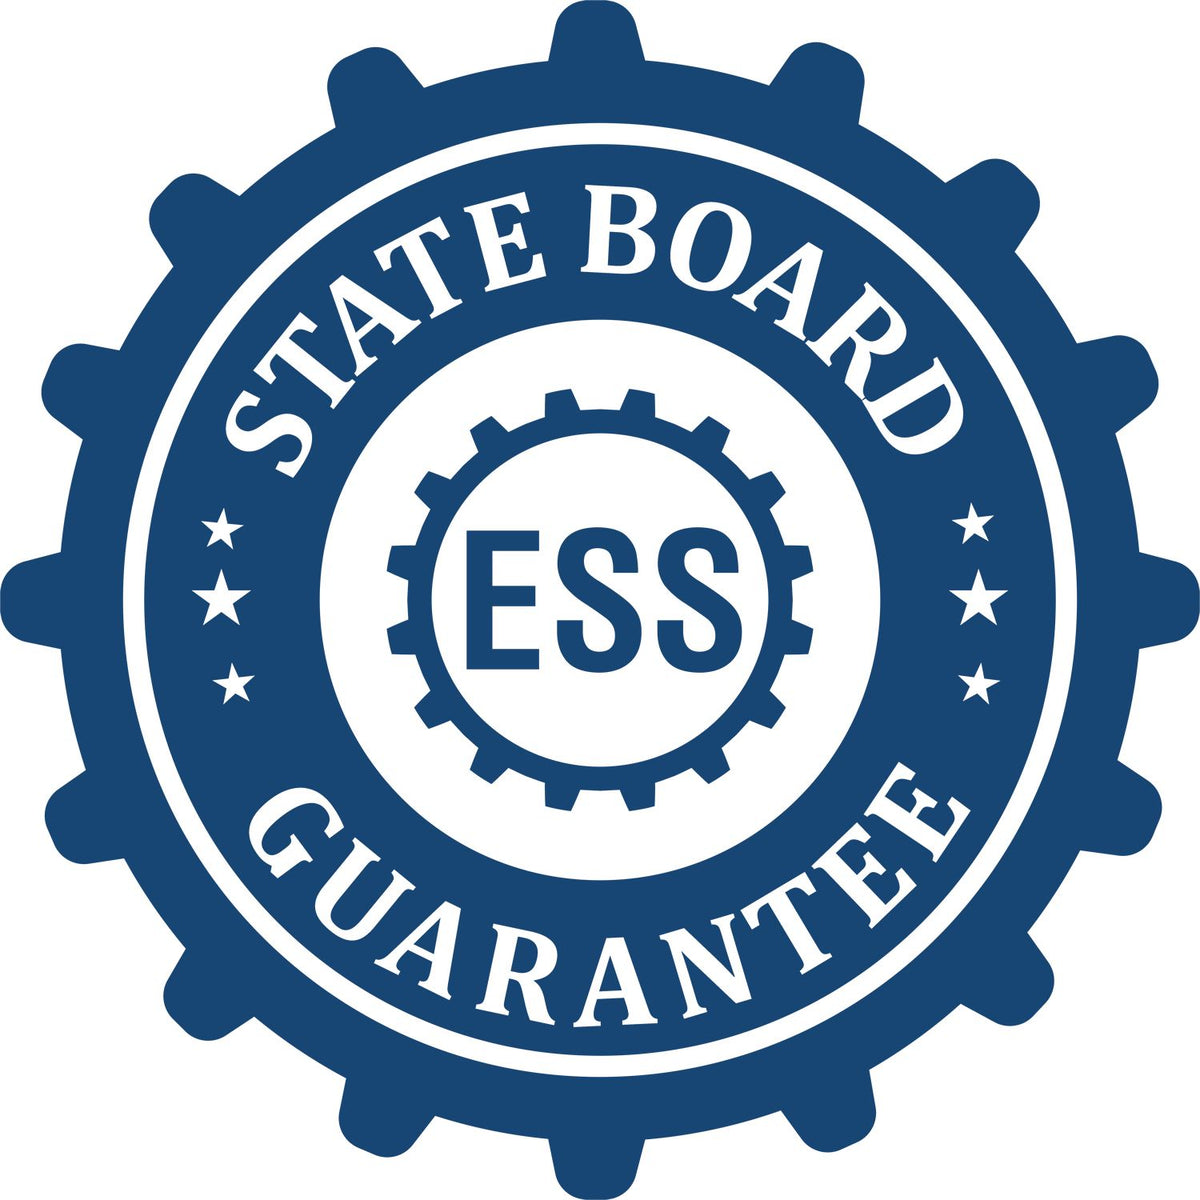 An emblem in a gear shape illustrating a state board guarantee for the Hybrid Louisiana Geologist Seal